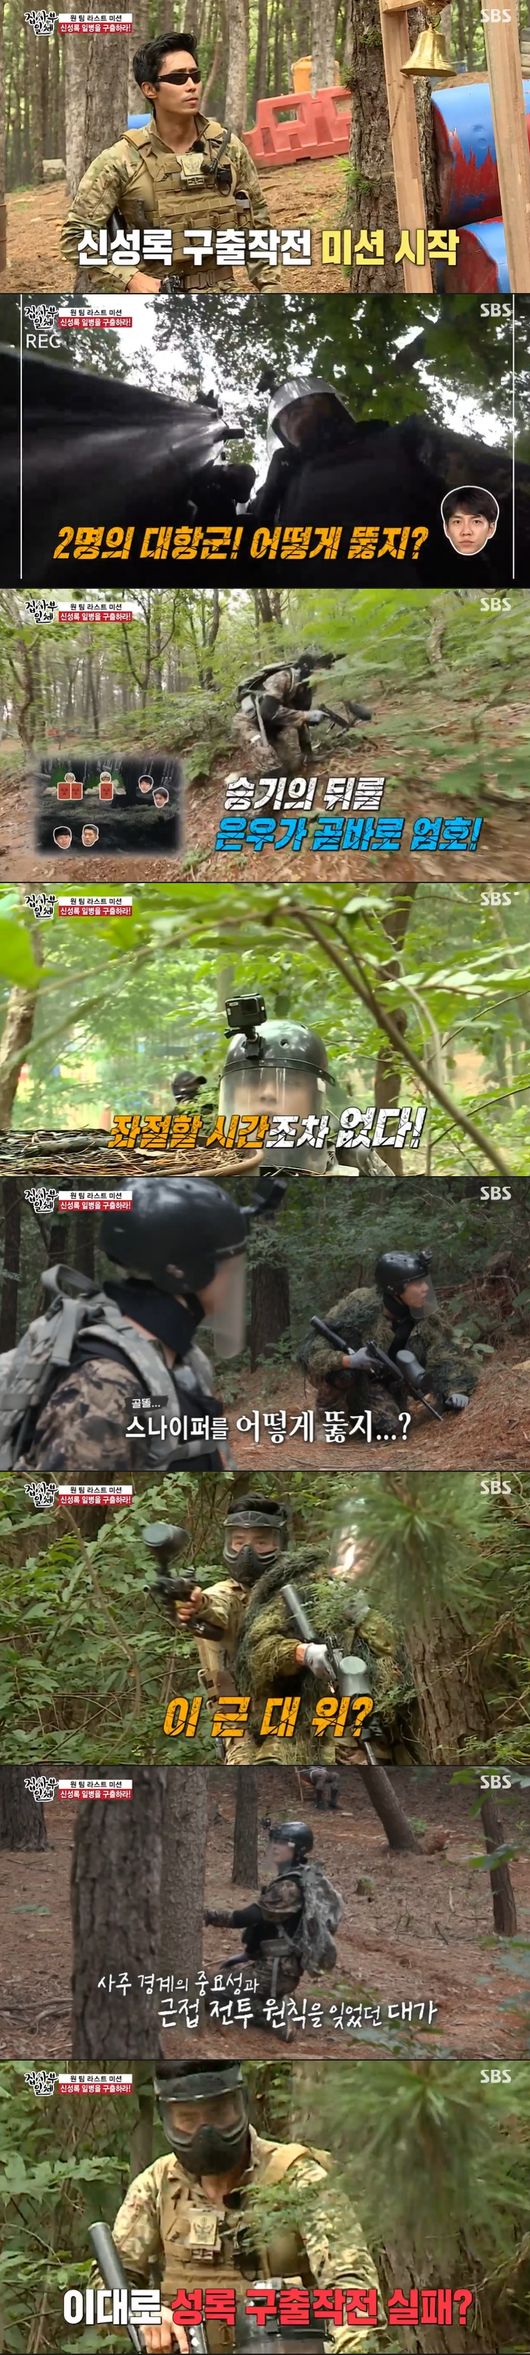 In All The Butlers, Lee Geun-Captain showed a sticky teamwork of All The Butlers, with a resemblance to South Korea soldiers.UDT Legend Captain America: Civil War Lee Geun Captain appeared as Master in the entertainment All The Butlers broadcast on the 20th.UDT Legend Captain America: Civil War Implant Captain has started training to become One Team.First, Lee Kahn Captain introduced the Bob Girl education method while preparing meals before training, and showed a jaw-mounted demonstration called UDT tradition.Members asked about UDT training at Lee Geun-Captain.Lee said, It is impossible, it is a unit that makes impossible possible. There are many difficult operations because Europe is a unit that should be trusted, but any operation should be successful. He said.I ask if I am afraid, but I have no time to feel fear or fear, he said. If the war is perfect, if someone is not lucky, someone can die. It is more responsible than fear that what kind of operation will succeed and what team members can be protected.Lee said, The reality can not predict all the risk factors. He gave a message to the lives of the privileged members who protect the nation with their lives as collateral.He then asked whether he was married with a private question.Lee said, Family matters are private, and the family can be targeted when the enemy attacks the special forces. He said that he does not disclose it because he and his family can be in danger.We started with UDT gun training in earnest. Lee Geun-Captain pulled out the training weapon and the members attention was focused.Lee said, If you get misplaced, you can die. He started a close combat training mission with a serious attitude from the shooting posture practice.Lee Keun Captain said, It is not a personal skill but a team tactic. He summoned Park Jung-sa, an army 707 specialist, and continued to train with Lee and Park in a close-range battle training.He told the mission to carry out a terrorist suppression mission, and when the team work is out of order, both the operation and life are dangerous, and informed him of training to strengthen faith and breathing among team members.The full-scale comprehensive practice training was started, and the identity of the blockbuster mission was revealed.Lee Geun-Captain moved the members to the operation command and delivered the Shin Sung-rok rescue mission that was kidnapped by the terrorist.It was a dynamic exercise to develop the UDT spirit of not abandoning team members under any circumstances.Shin Sung-rok, who became a hostage, was immersed in the situation drama and began training fully armed with the UDT spirit of never abandoning his team members.In the forest of more than 3,000 pyeong, the members went into operation and started to move with one pair of two people.Lee Seung-gi applied this as he learned in training, showed the posture of Captain America: Civil War, and began the search according to Lee Seung-gis opinion.I found a supply box with perfect teamwork, and I returned it with Gillishsuit costume.With Kim Dong-Hyun and Yang Se-hyeong in-N-Out Burger, Lee Seung-gi and Jung Eun-woo near Shin Sung-rok.But another sniper remains. The second-hand Captain came through the rear boundary with Lee Seung-gi and Jung Eun-woo in close contact.It was literally a close battle, and Jung Eun-woo was the In-N-Out Burger.Lee Geun-Captain gave Lee Seung-gi a 30-second chance, and Lee Seung-gi hit another Sniper.Lee Seung-gi, who had the final Sniper in-N-Out Burger, succeeded in rescuing Shin Sung-rok, followed by where the wounded trainees were.Finding all the team members back and returning together.But the training was over, but I could not keep the time limit of 30 minutes.Lee said, The mission was successful, he said. I brought all the injured people, but I was successful because I finished it together.Lee said, I realized a well-organized teamwork, a training that was one of five, and the members also expressed their pride in the training, saying, It has become a real All The Butlers.When asked about Lees dream, he said, I have learned and felt experiences so far, Europe was possible. I want to return it to South Korea, and I will try to develop our Europe in the future.I think the soldiers have the best job, even though they have a small salary, and I am proud of every privileged member, and the members admired it as South Korea soldiers impact.All The Butlers broadcast screen capture